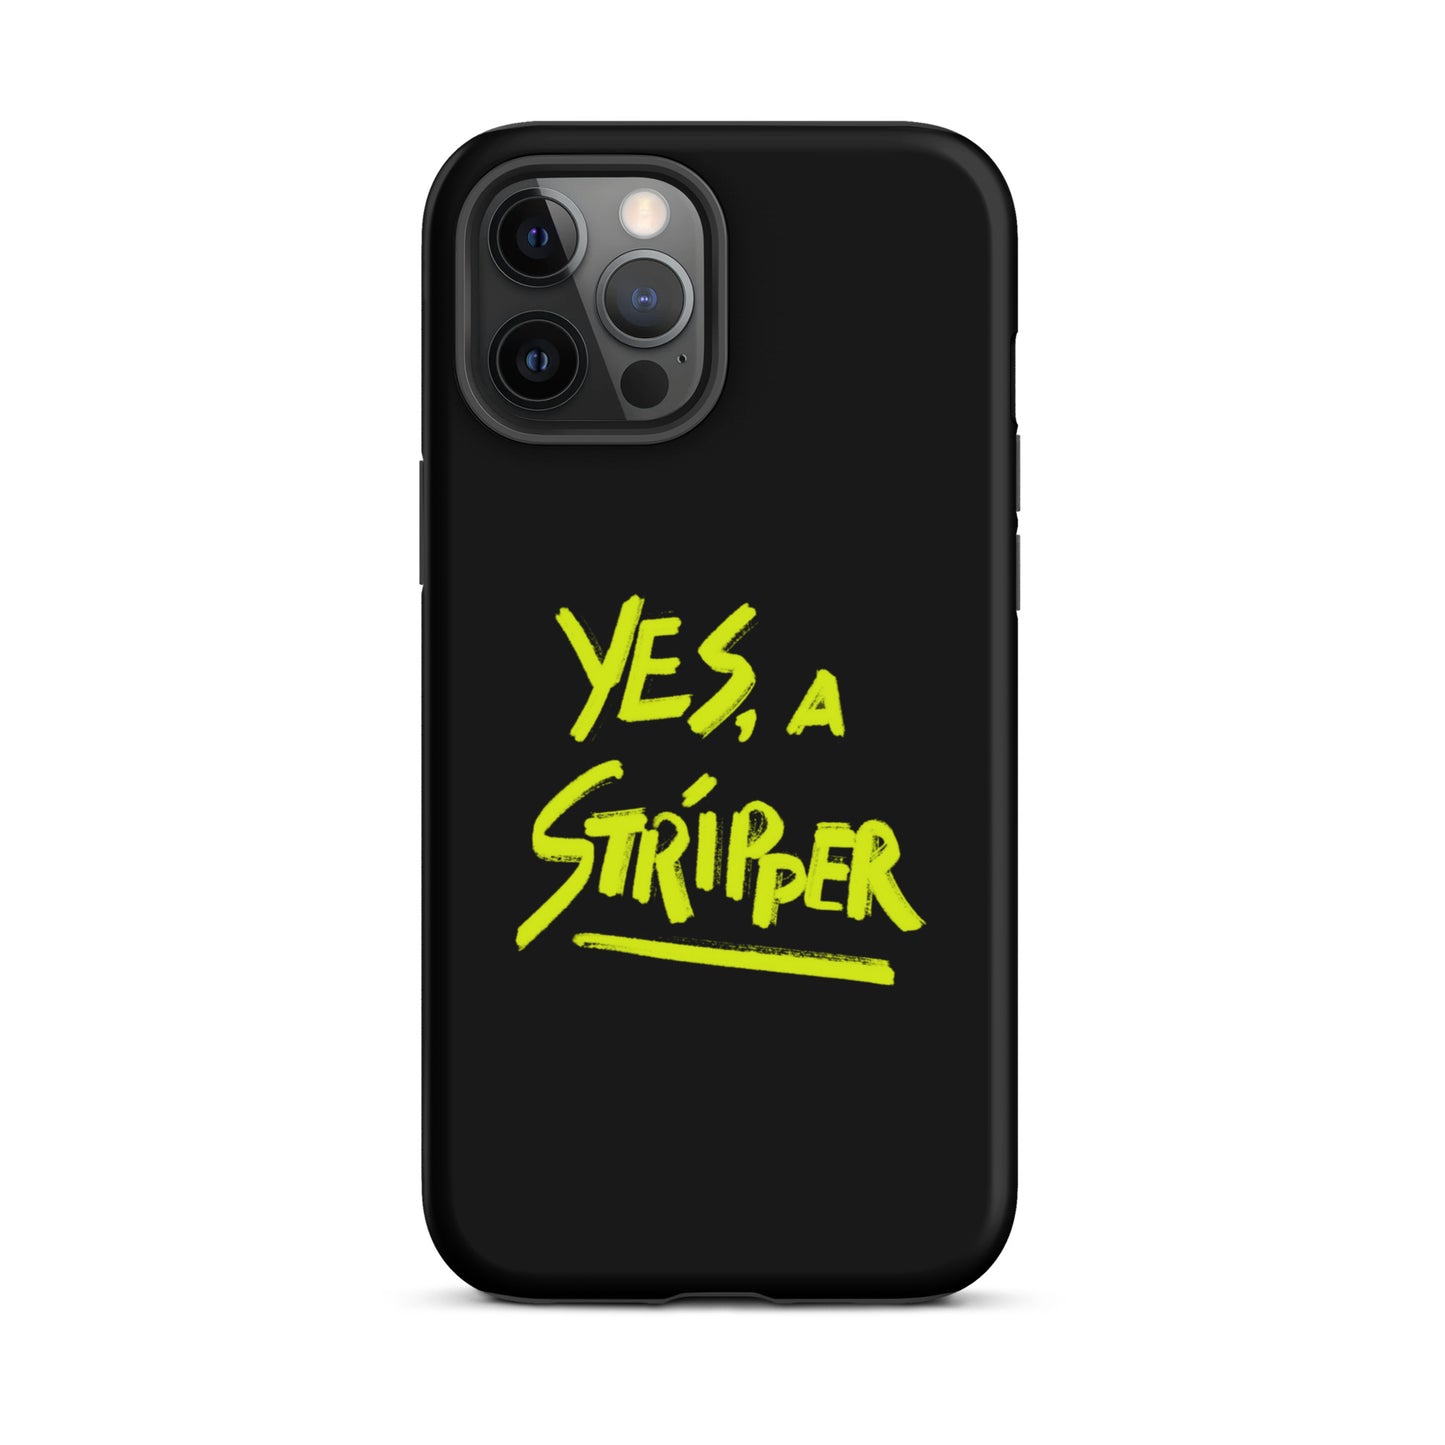 Black with Bright Yellow YaS Logo Phone Case for iPhone